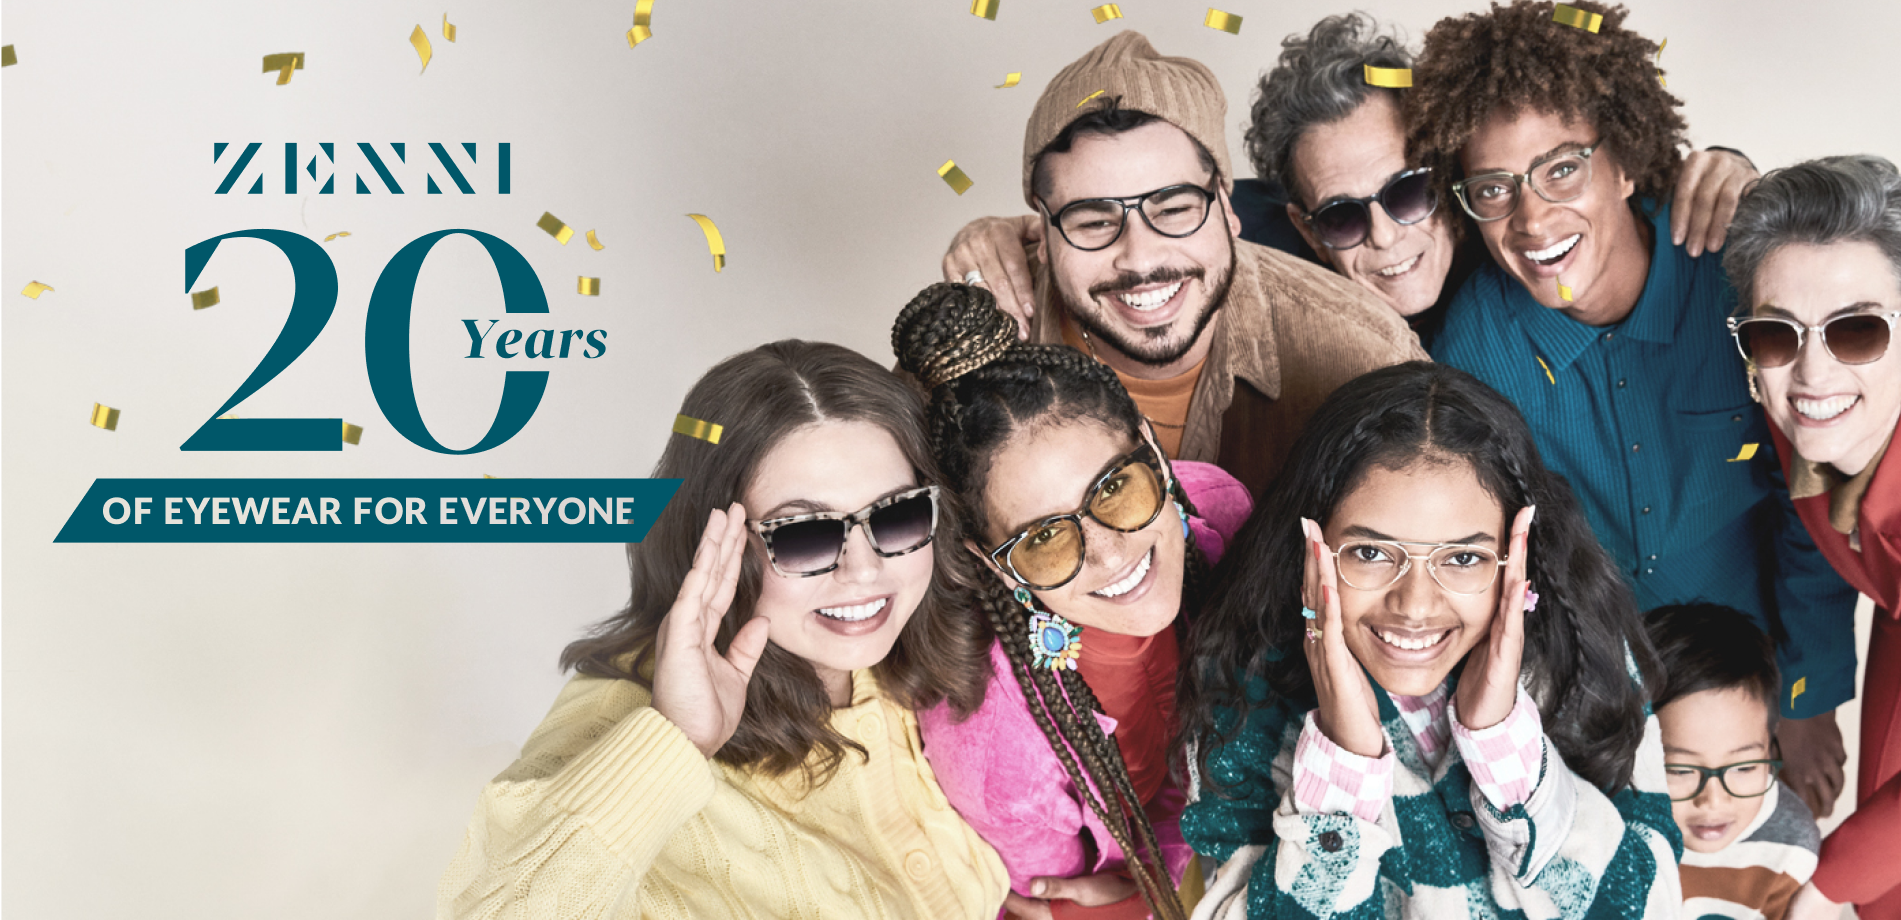 Group of people celebrating Zenni’s 20 years of Eyewear for Everyone by showing off their Zenni glasses, sunglasses, and blue light glasses.